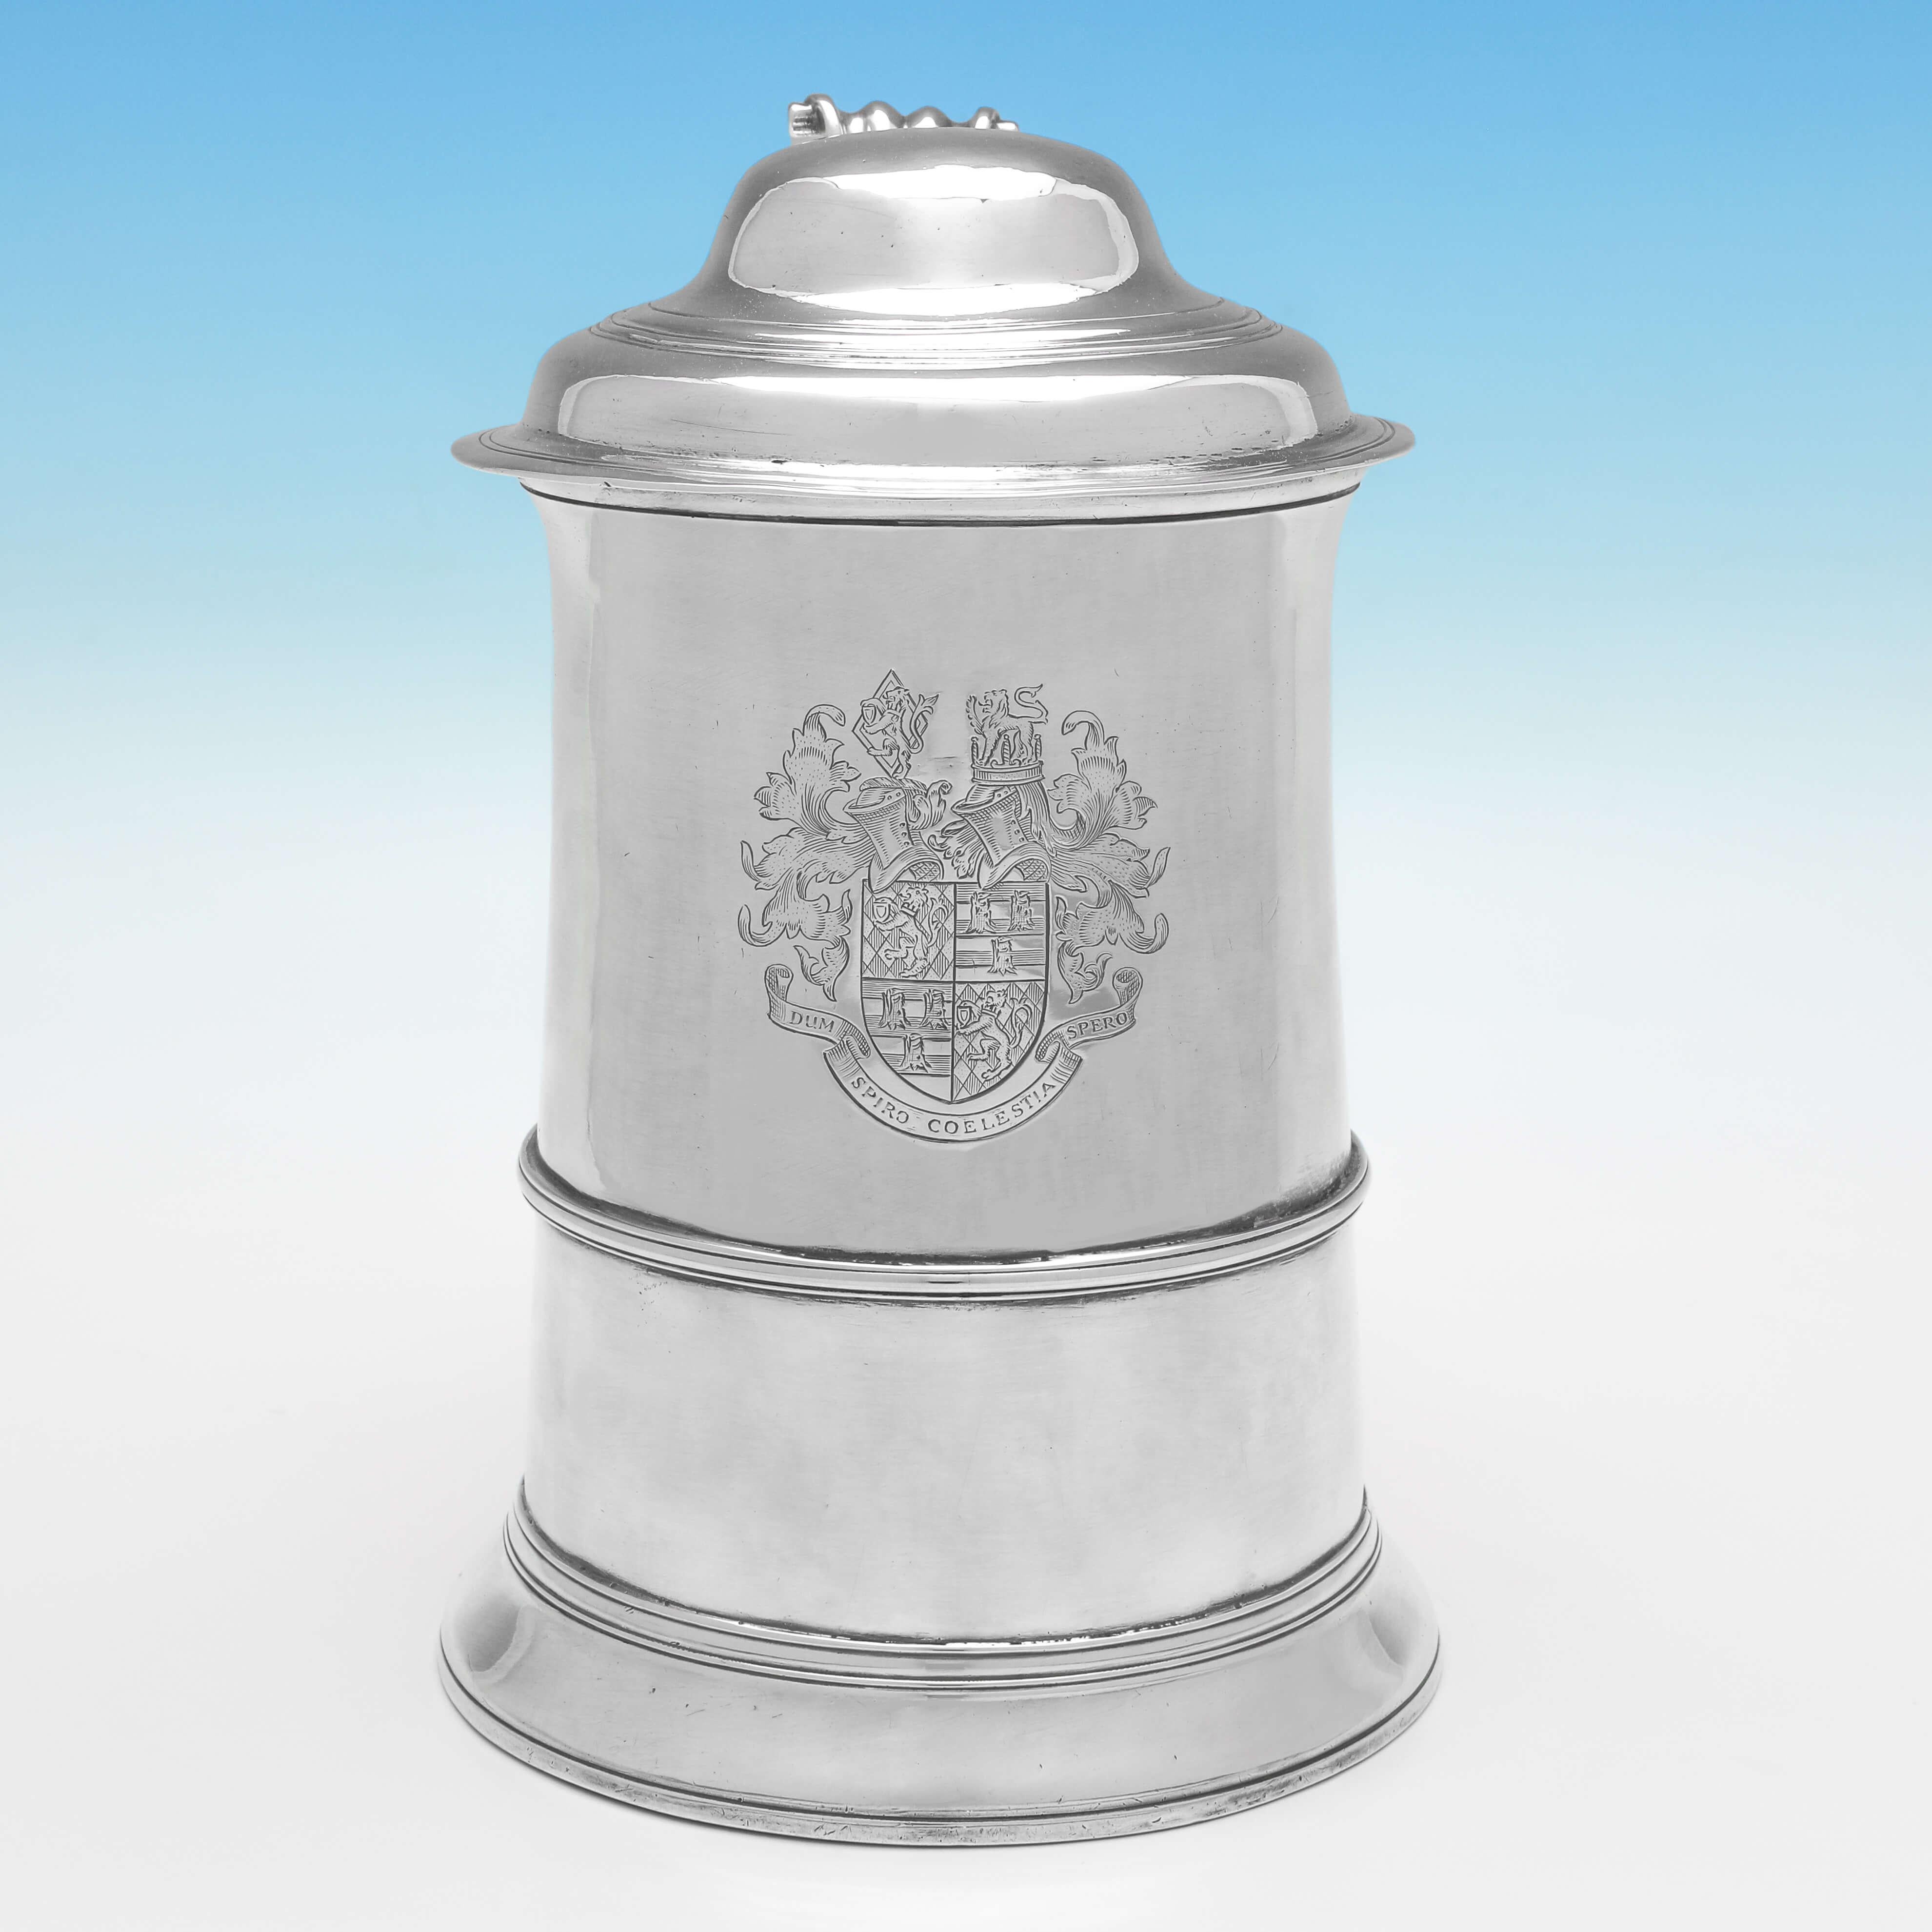 Hallmarked in London in 1774 by John King, this wonderful, George III period, Antique Sterling Silver Tankard, is of traditional straight sided form, and is engraved with a coat of arms opposite the handle. The tankard measures 7.5